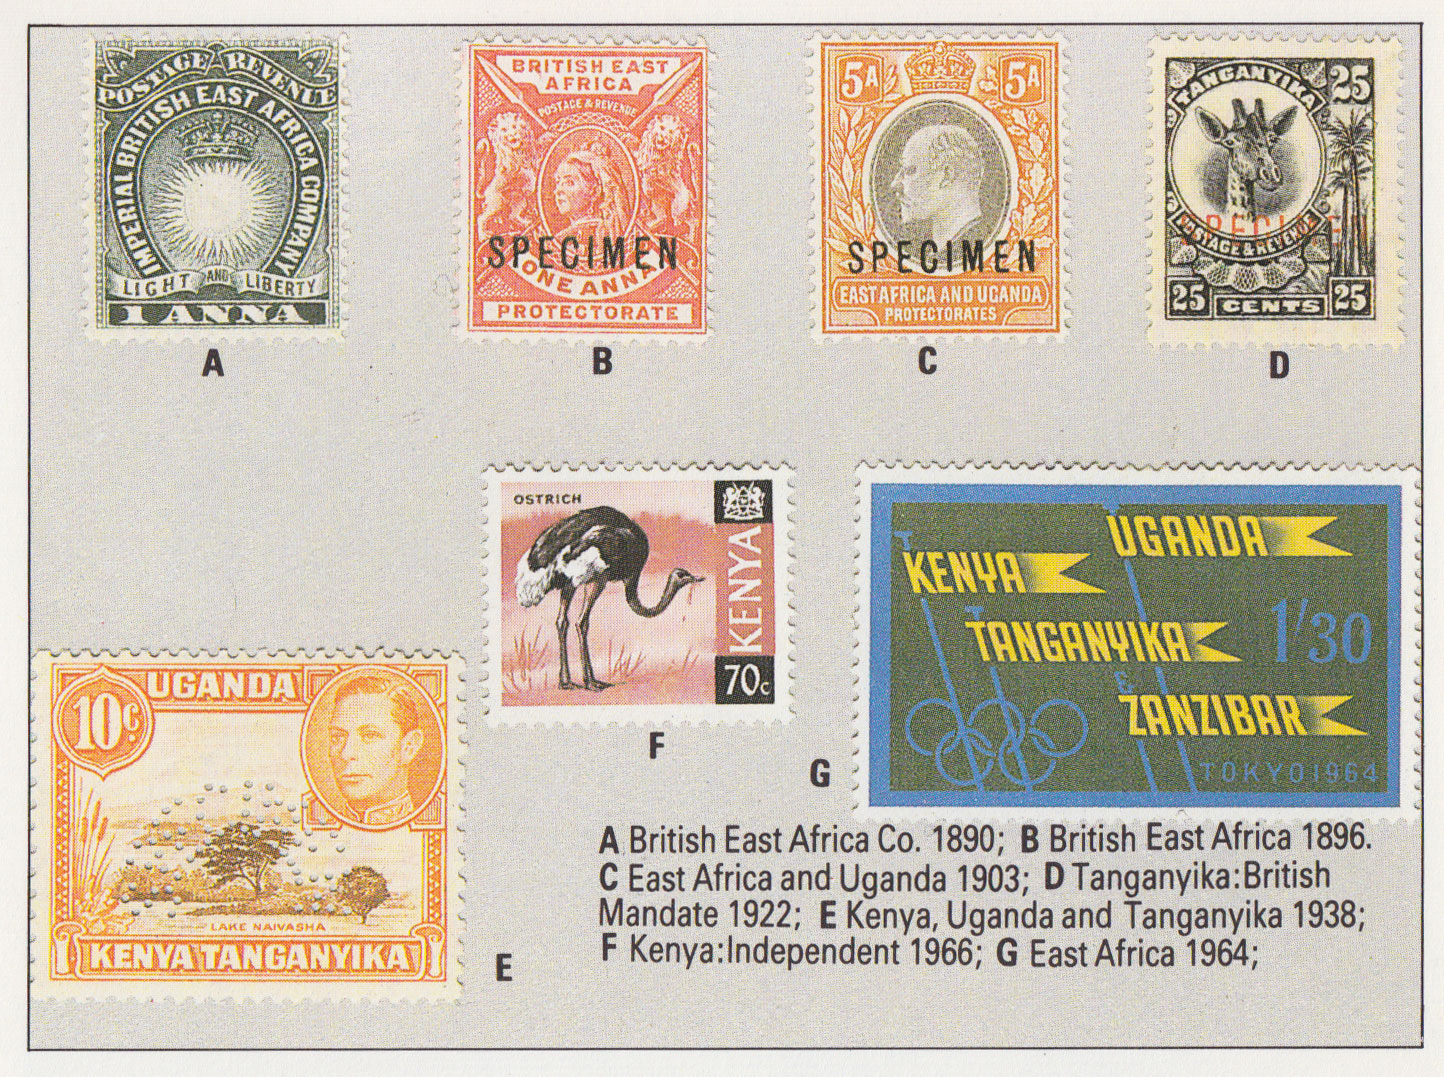 British East Africa company stamps